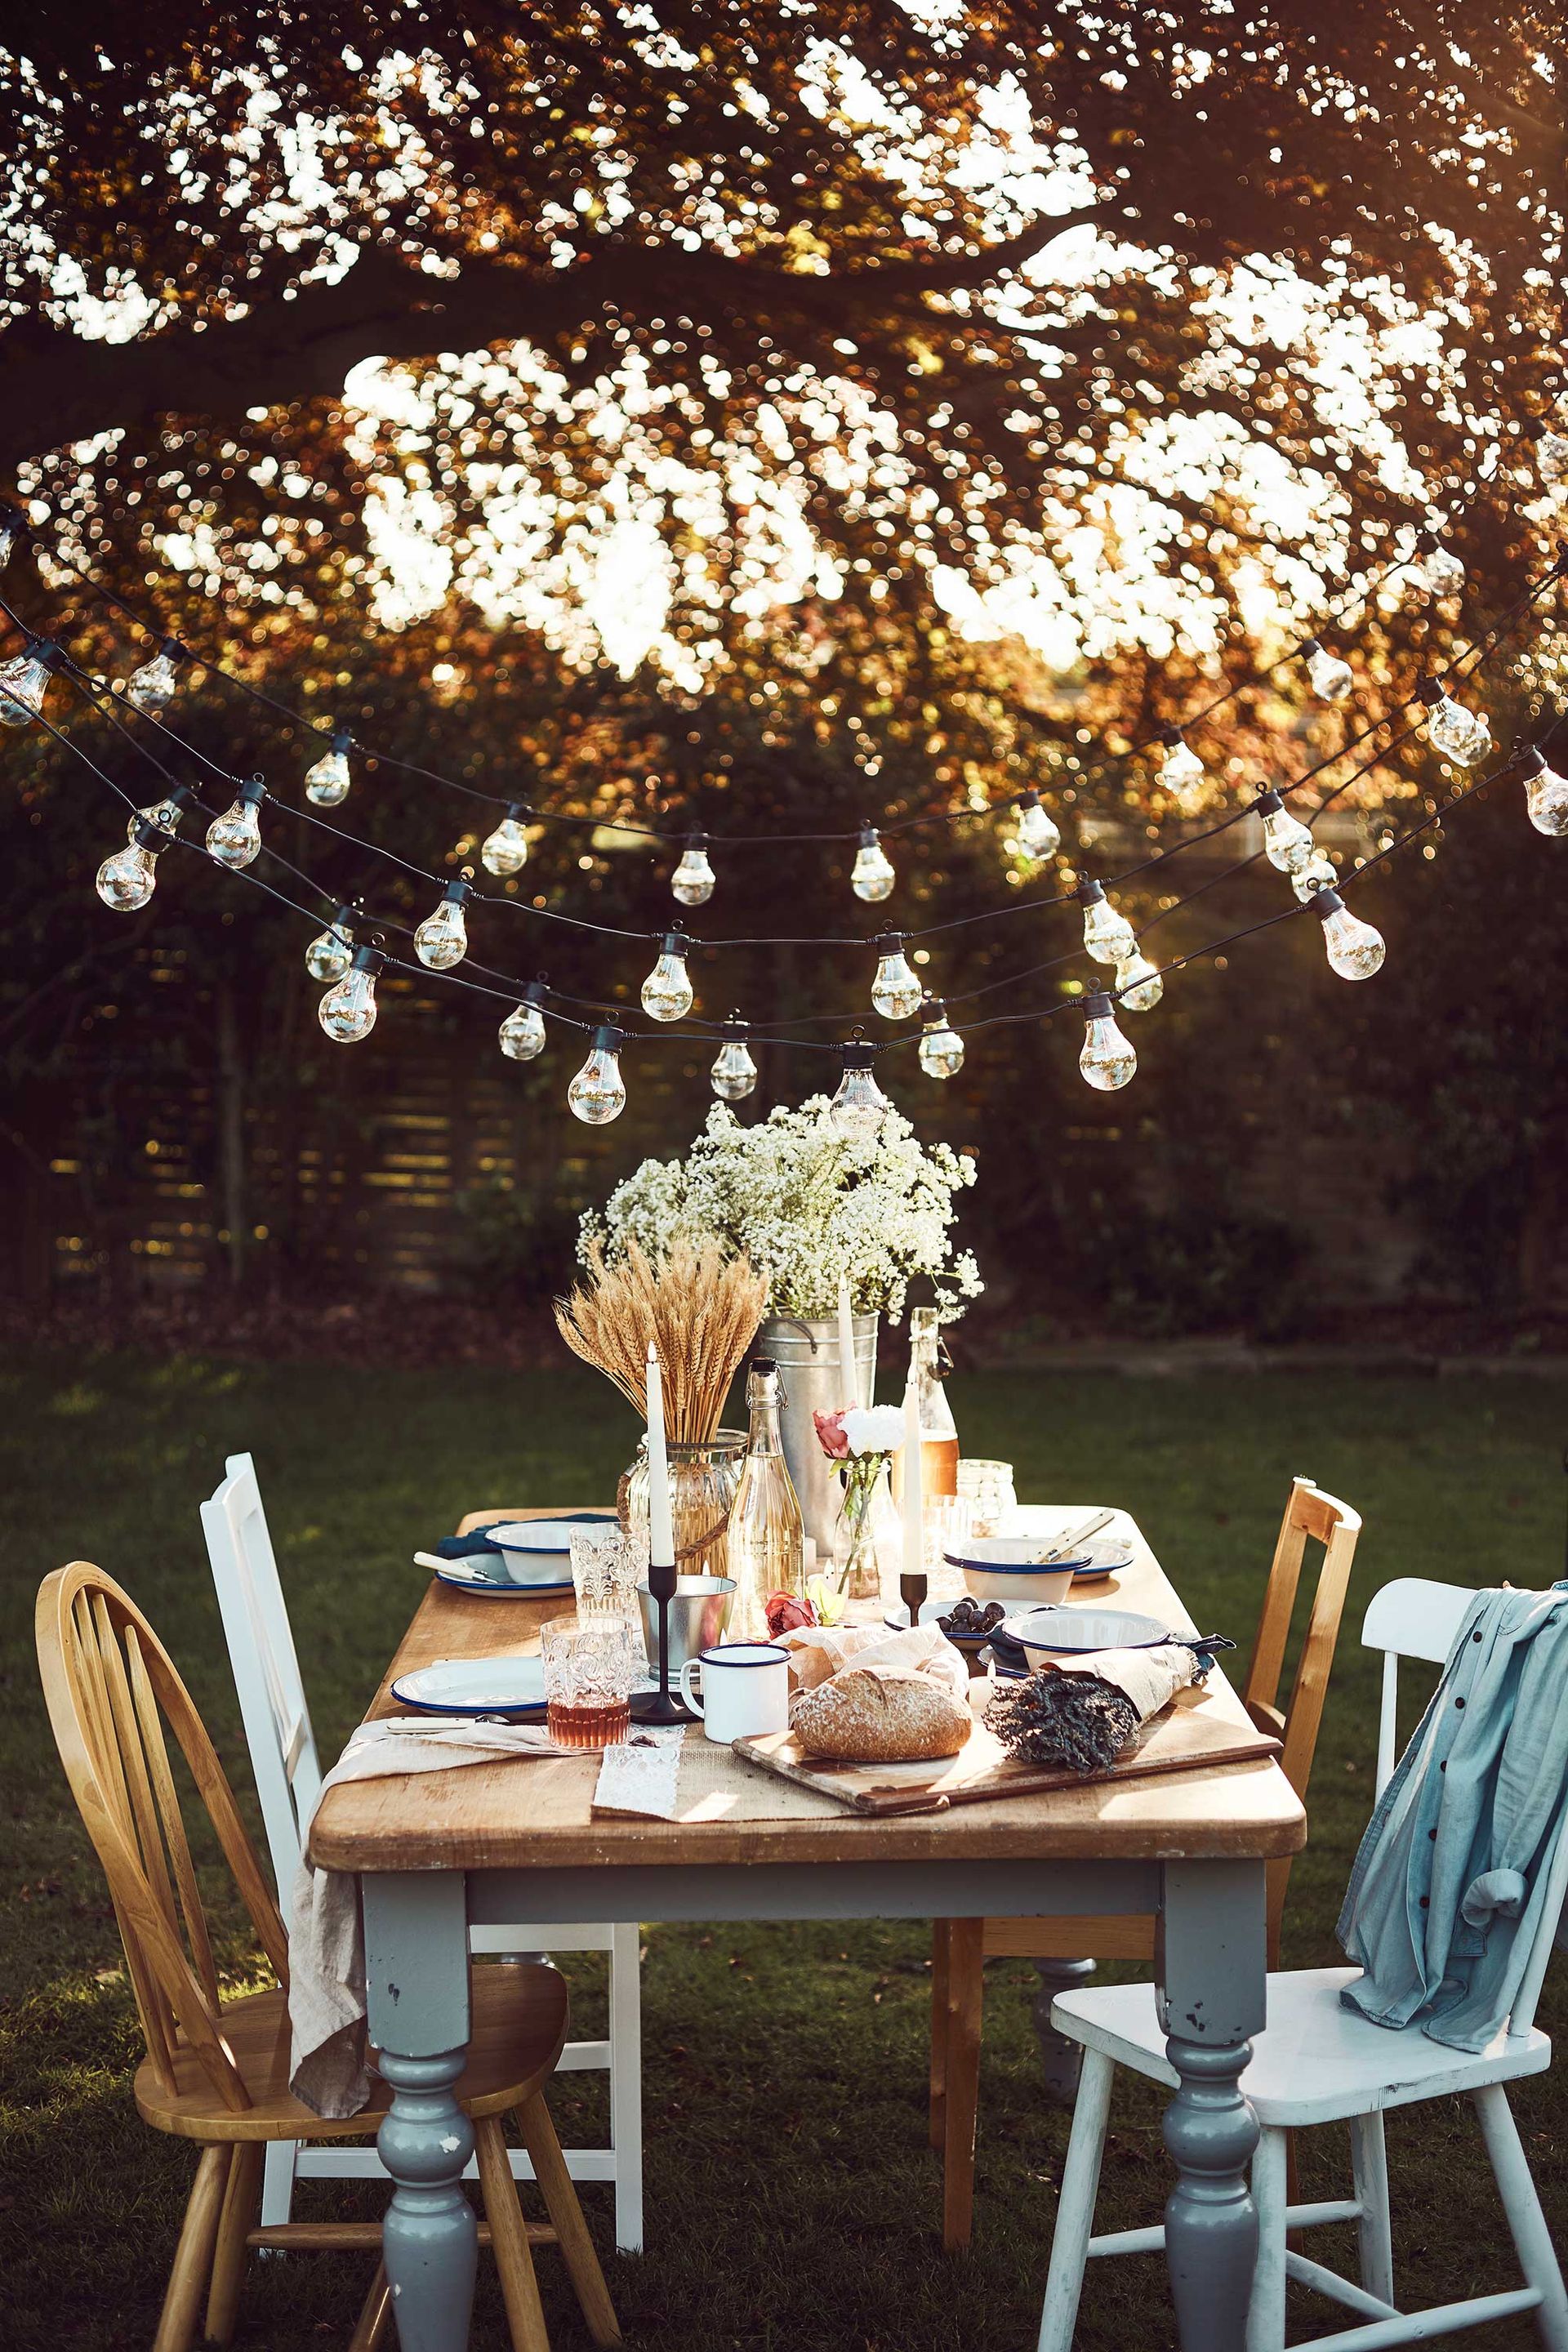 <p>                     If your outdoor table is a little small for large-scale entertaining, then don't be afraid to put your indoor table and chairs to good use. Bringing them out onto the lawn or patio just for the day will instantly give your backyard a refreshed look and make it feel more special.                   </p>                                      <p>                     String up festoons overhead from nearby trees or fences for an atmospheric glow once the sun begins to set. A jumble of different sized vases filled with both fresh and dried flowers and foliage; wooden boards; mix and match table linens and cut glass tumblers will form an eclectic and relaxing vibe. Add blankets and cushions too, to keep everyone toasty should a breeze pick up.                   </p>